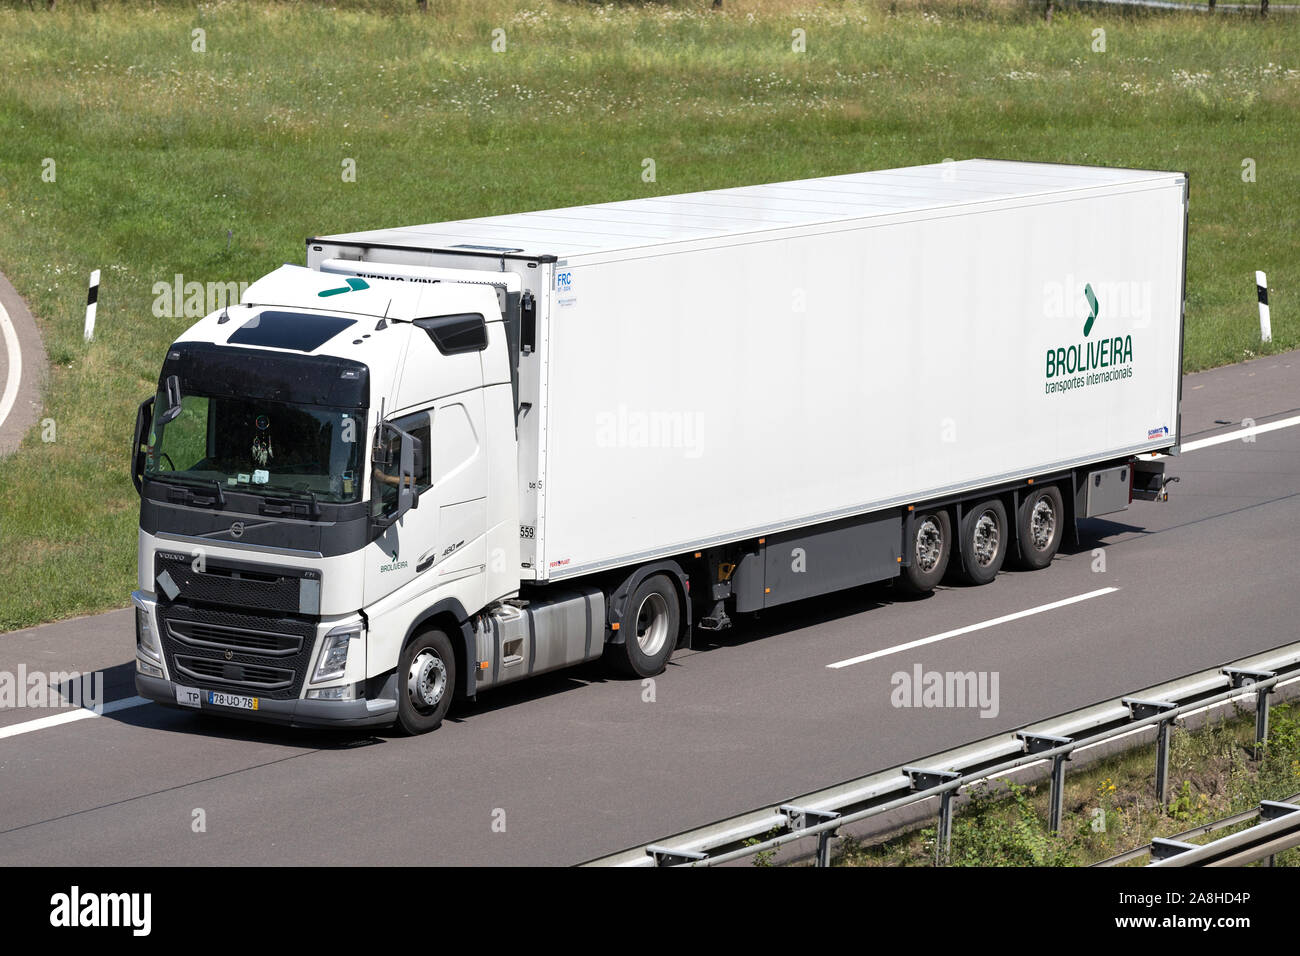 Broliveira Volvo truck with temperature controlled trailer on motorway. Stock Photo